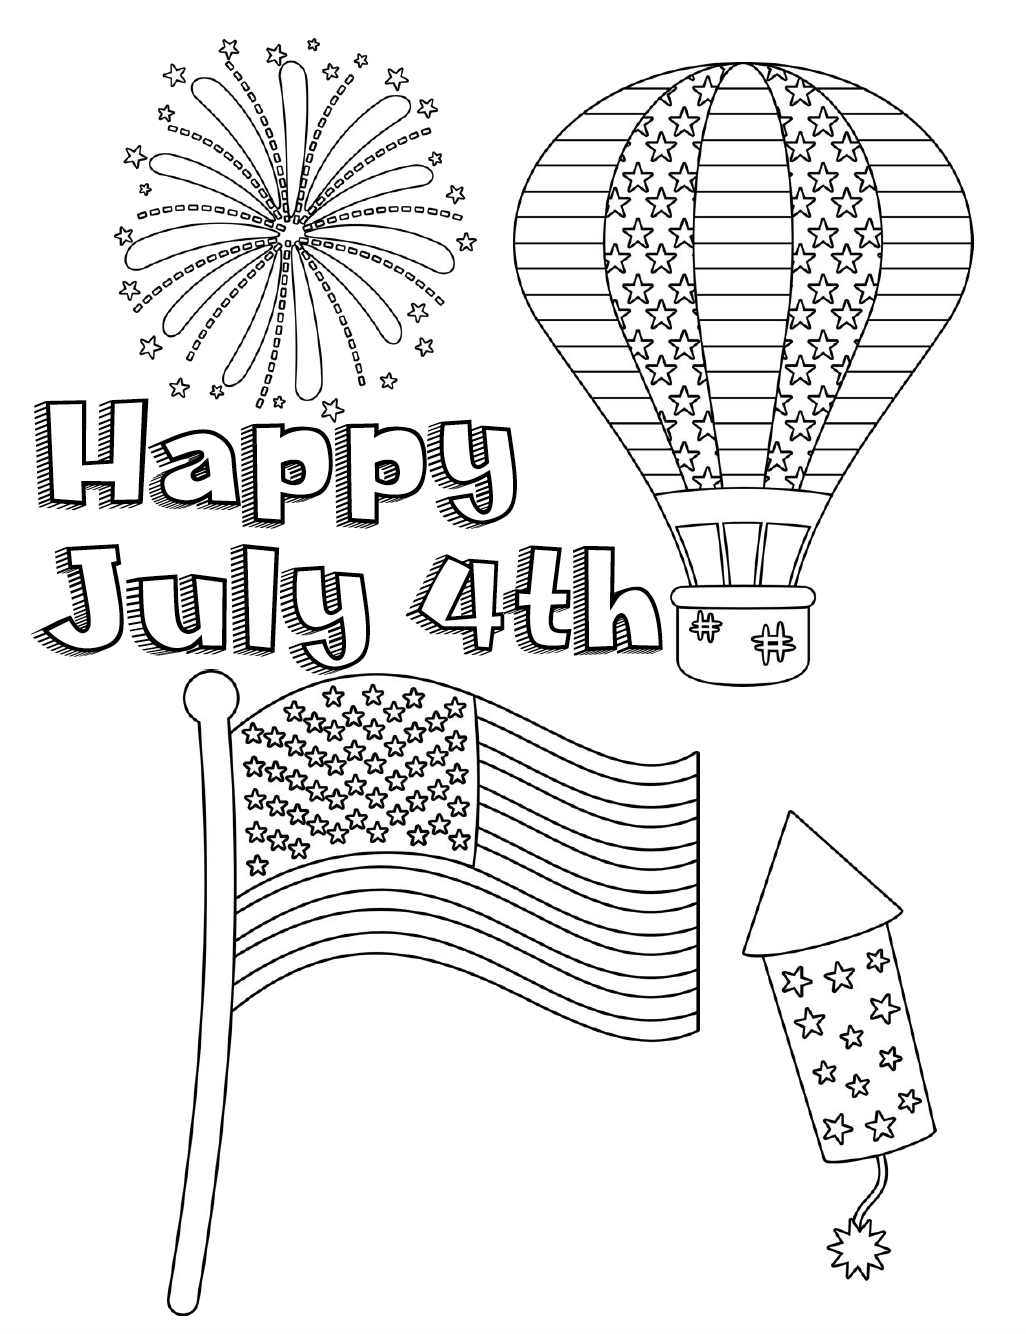 Free Printable Fourth Of July Coloring Pages: 4 Designs - Free Printable 4Th Of July Coloring Pages